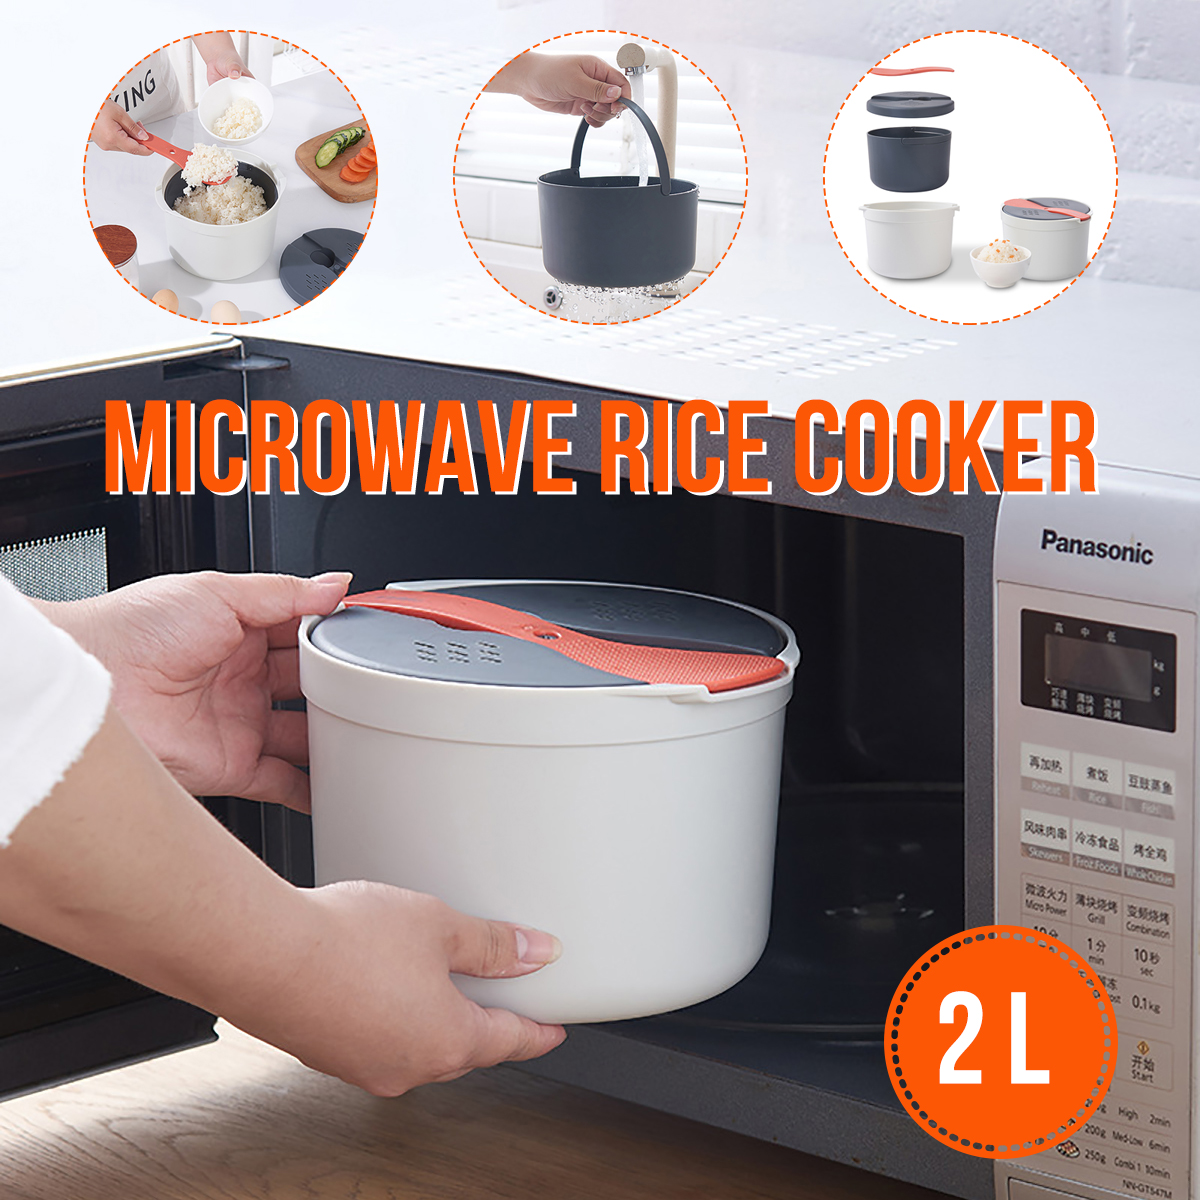 Microwave-Rice-Cooker-Microwave-Rice-Steamer-Bowl-Cooker-Tools-Kitchen-Utensils-1608738-1